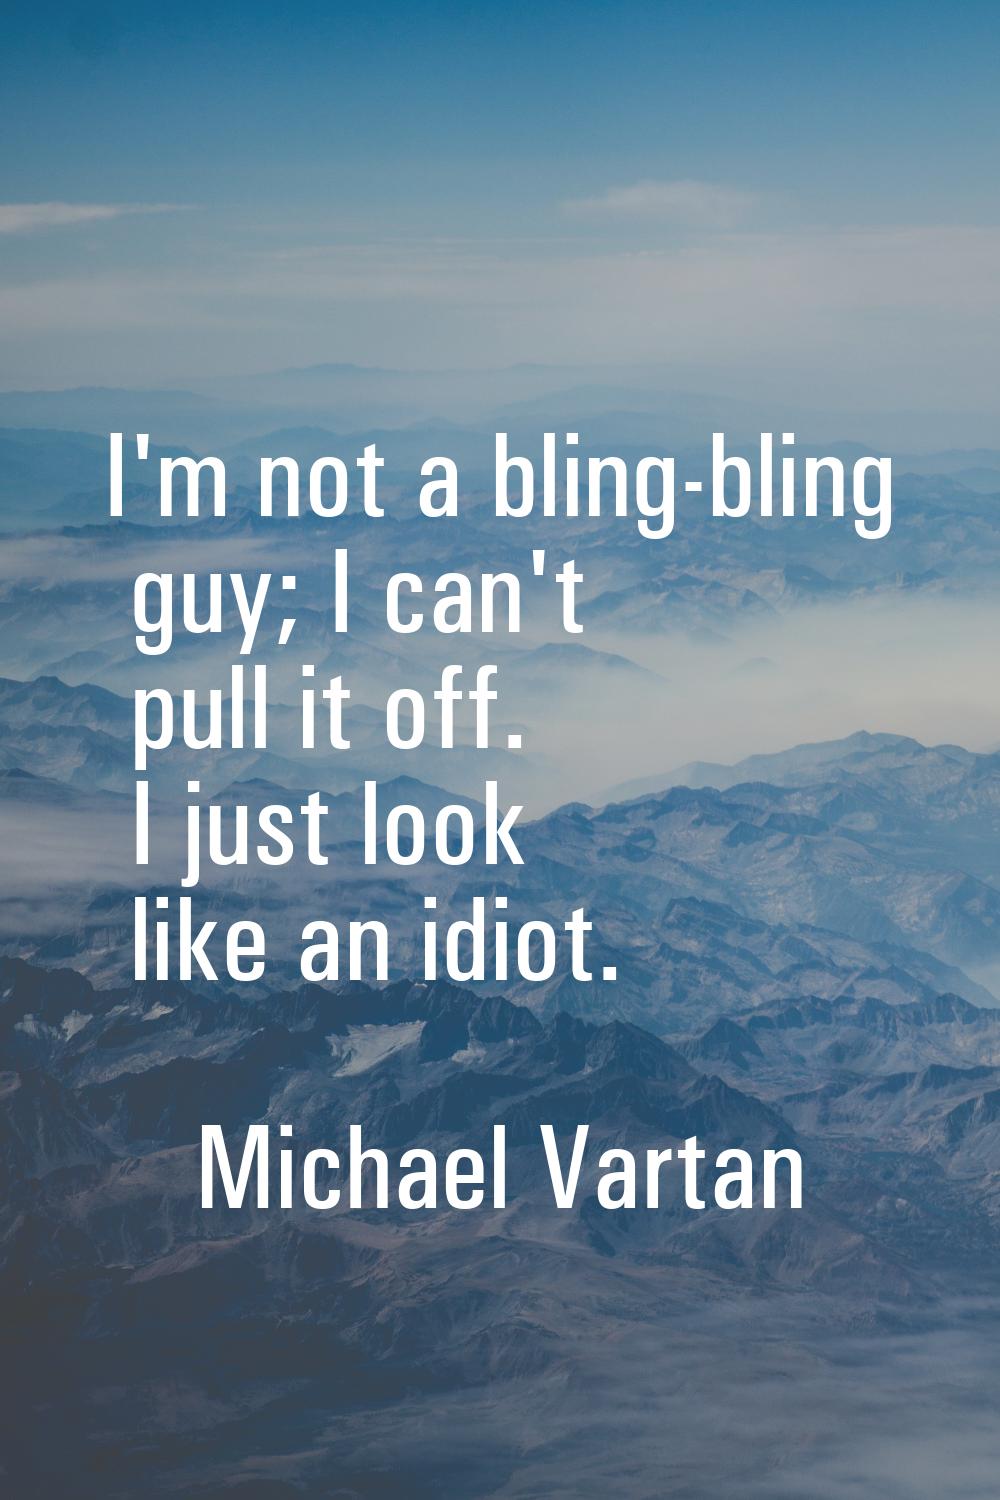 I'm not a bling-bling guy; I can't pull it off. I just look like an idiot.